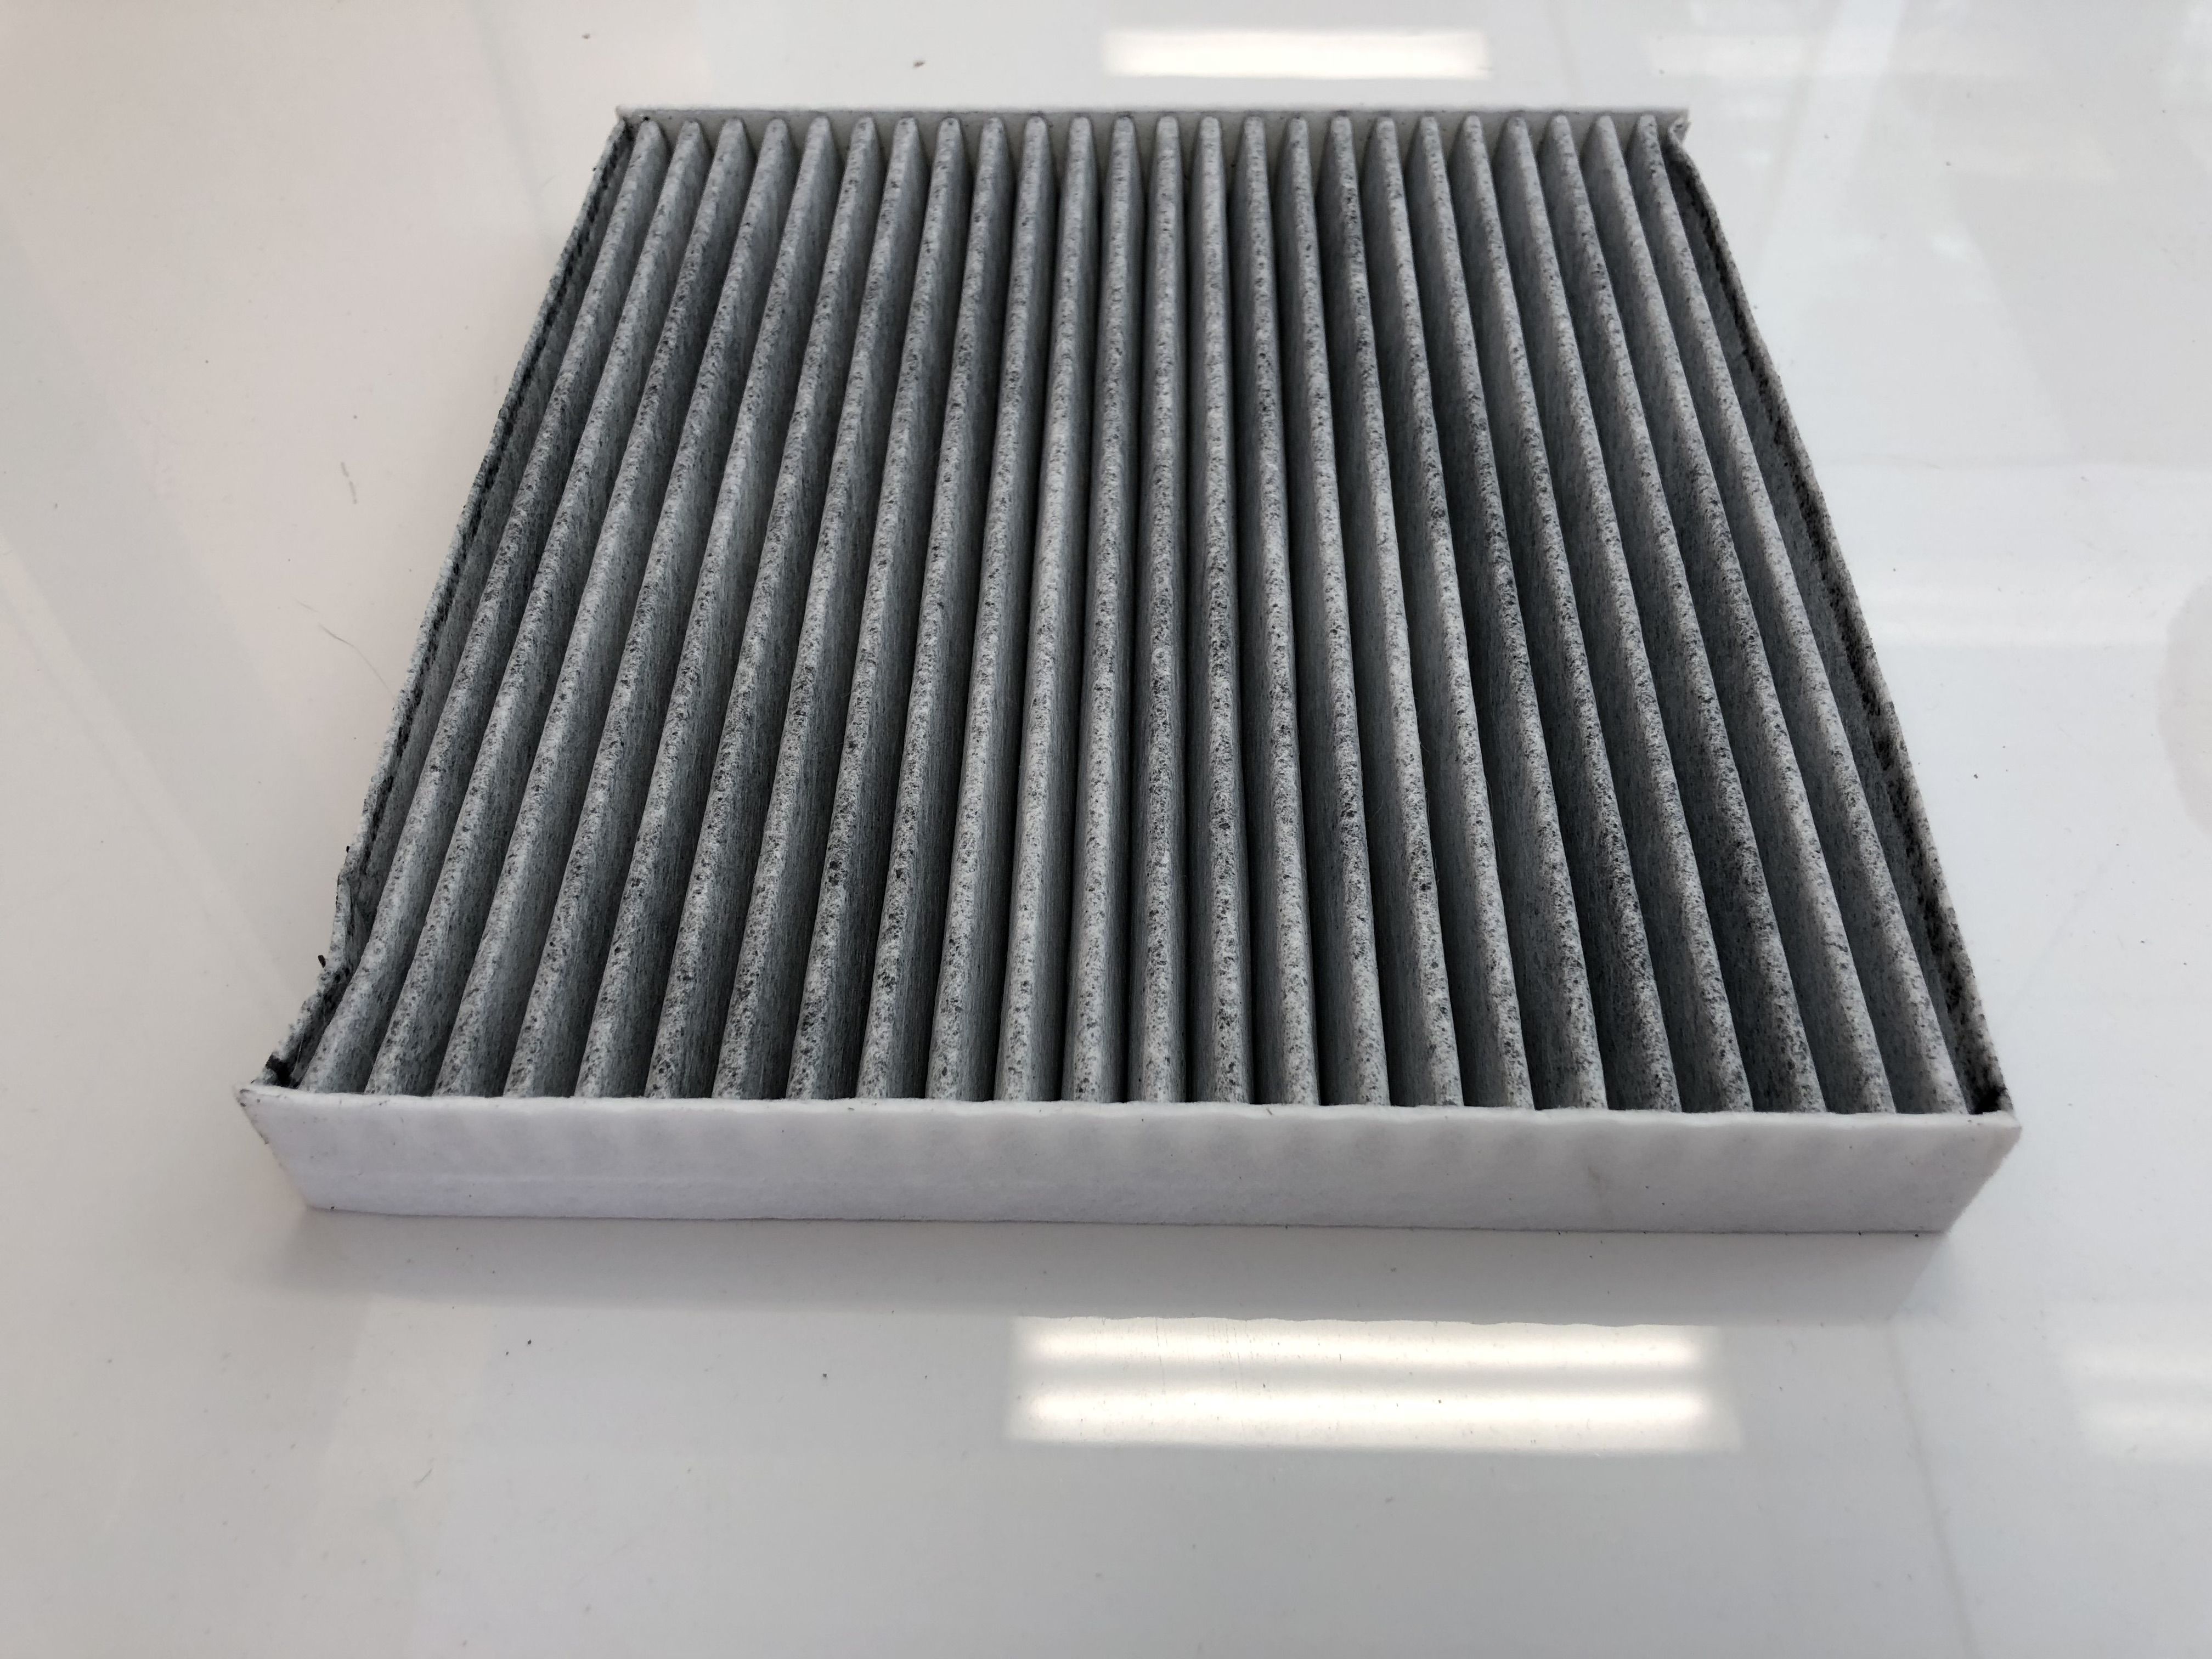 Activated Carbon Cabin Filters – Are they better than paper cabin filters?